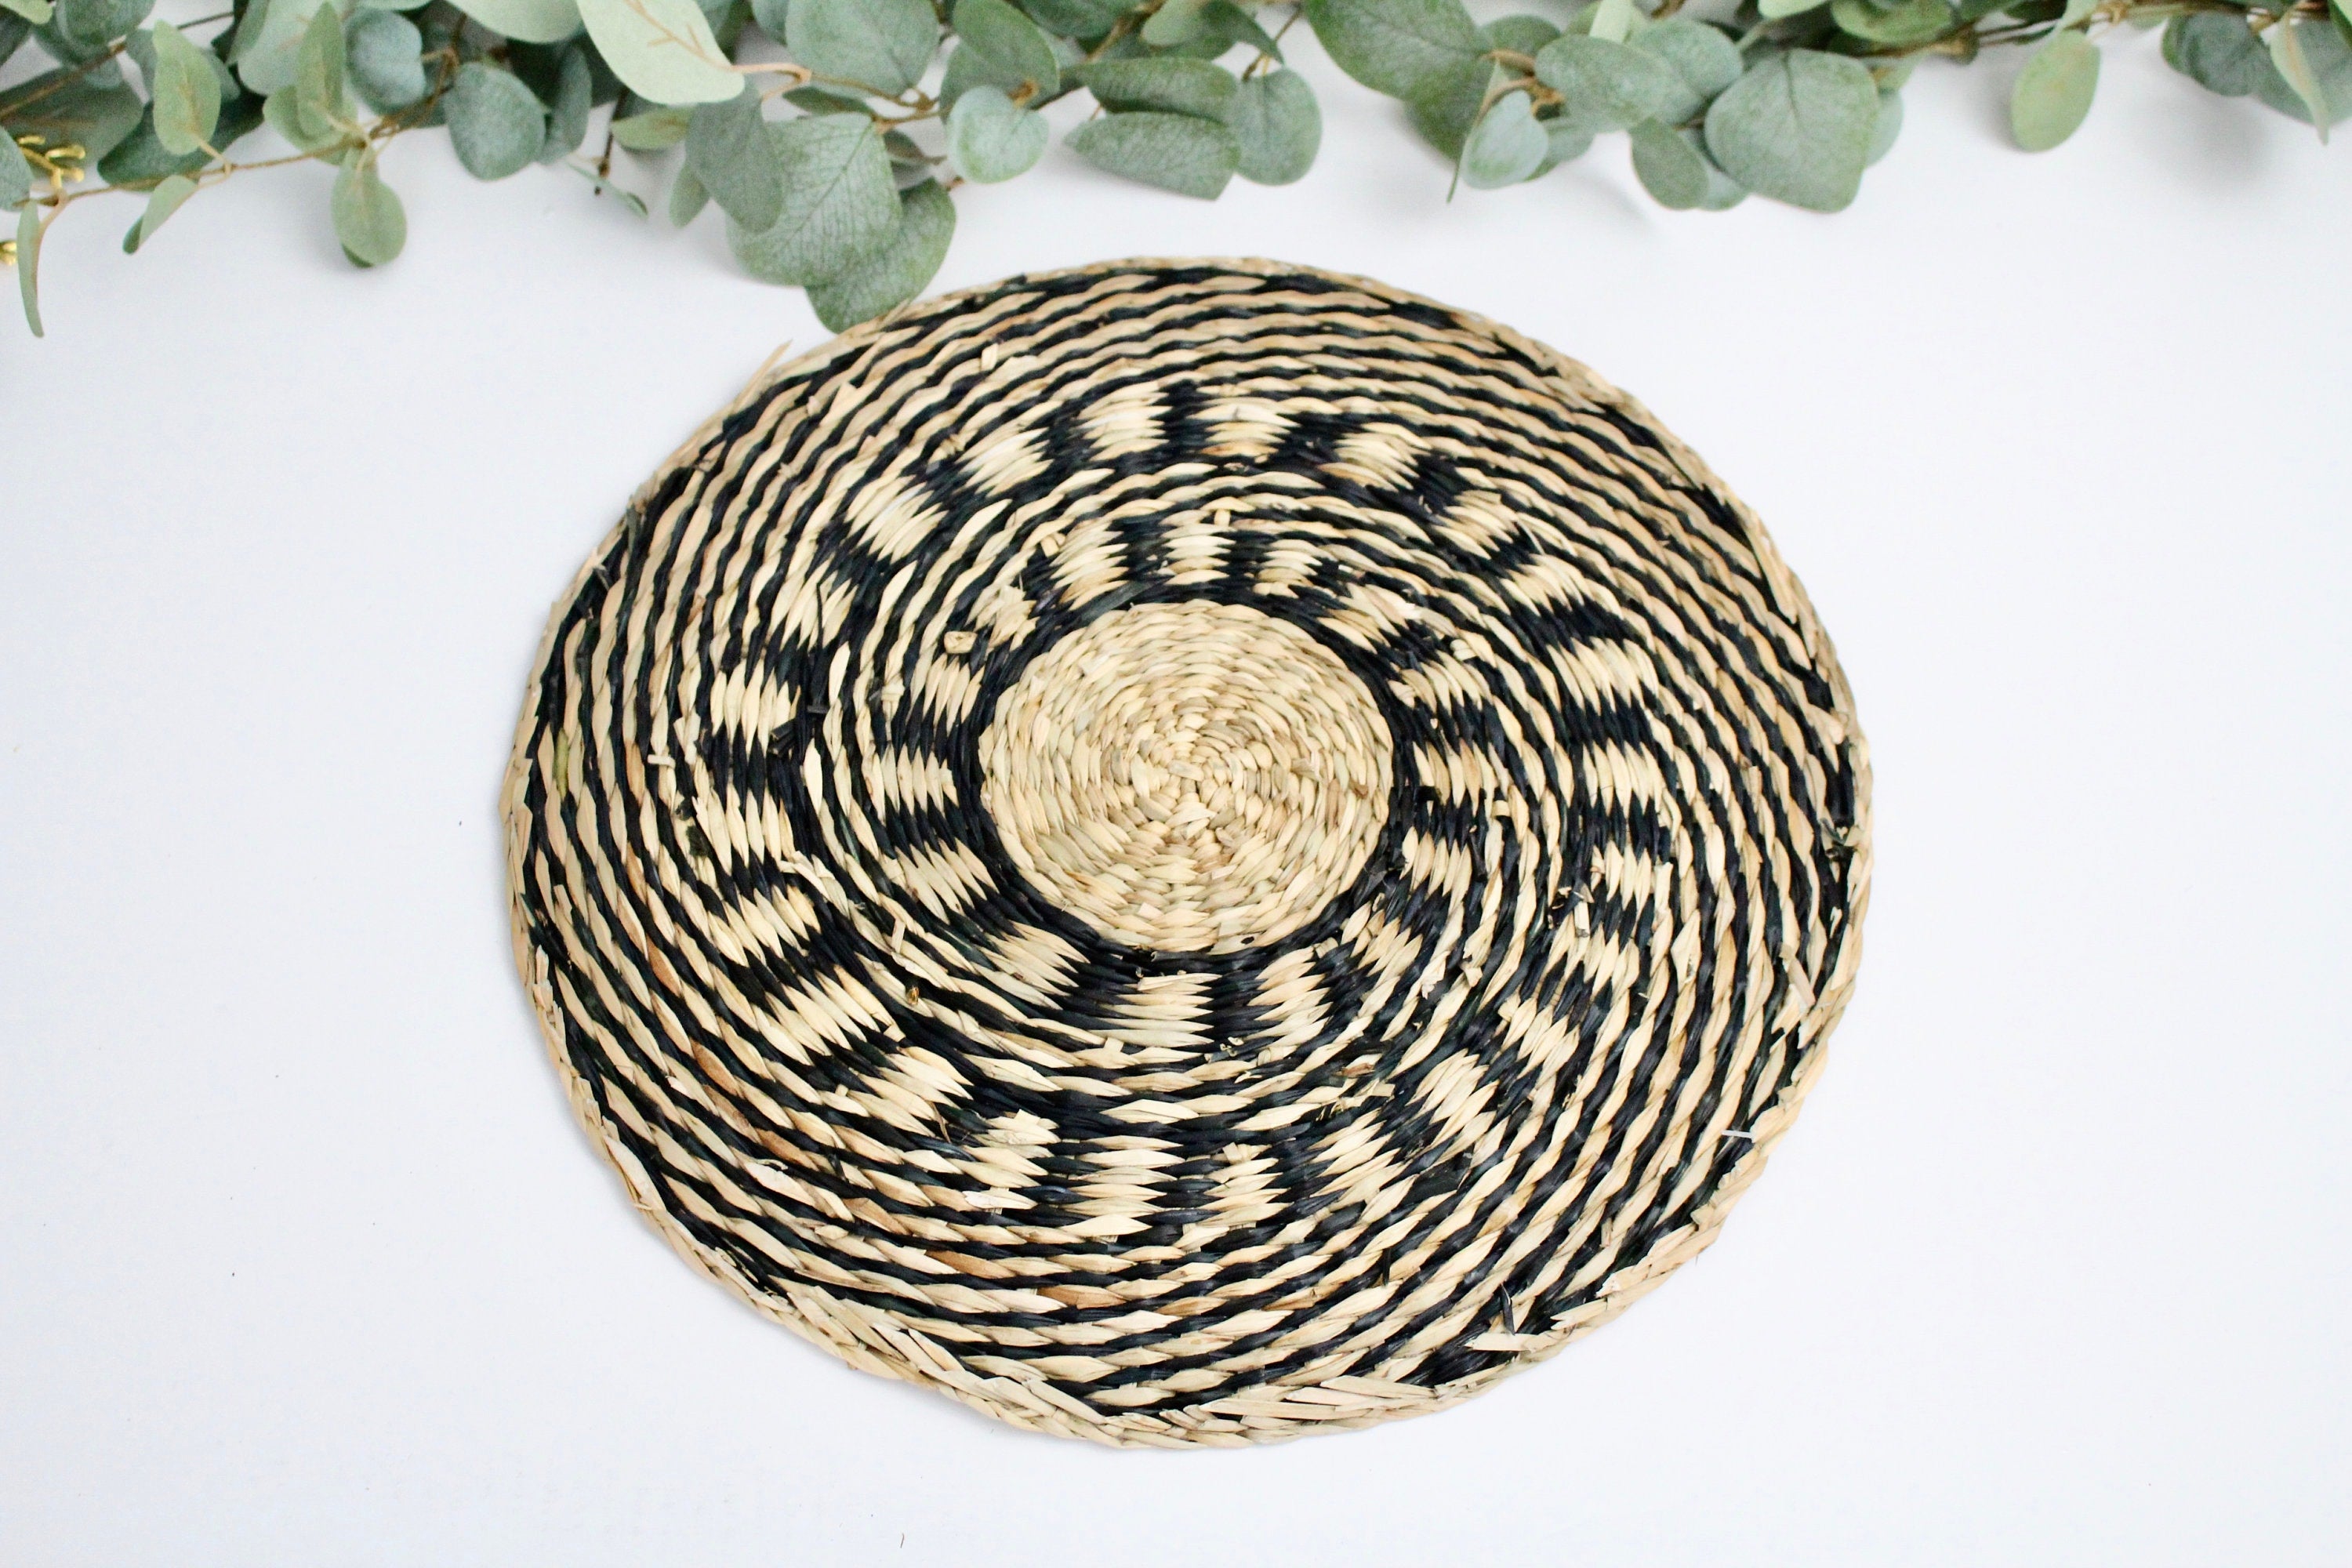 Black and Beige Swirl Woven Placemat CLEARANCE SALE